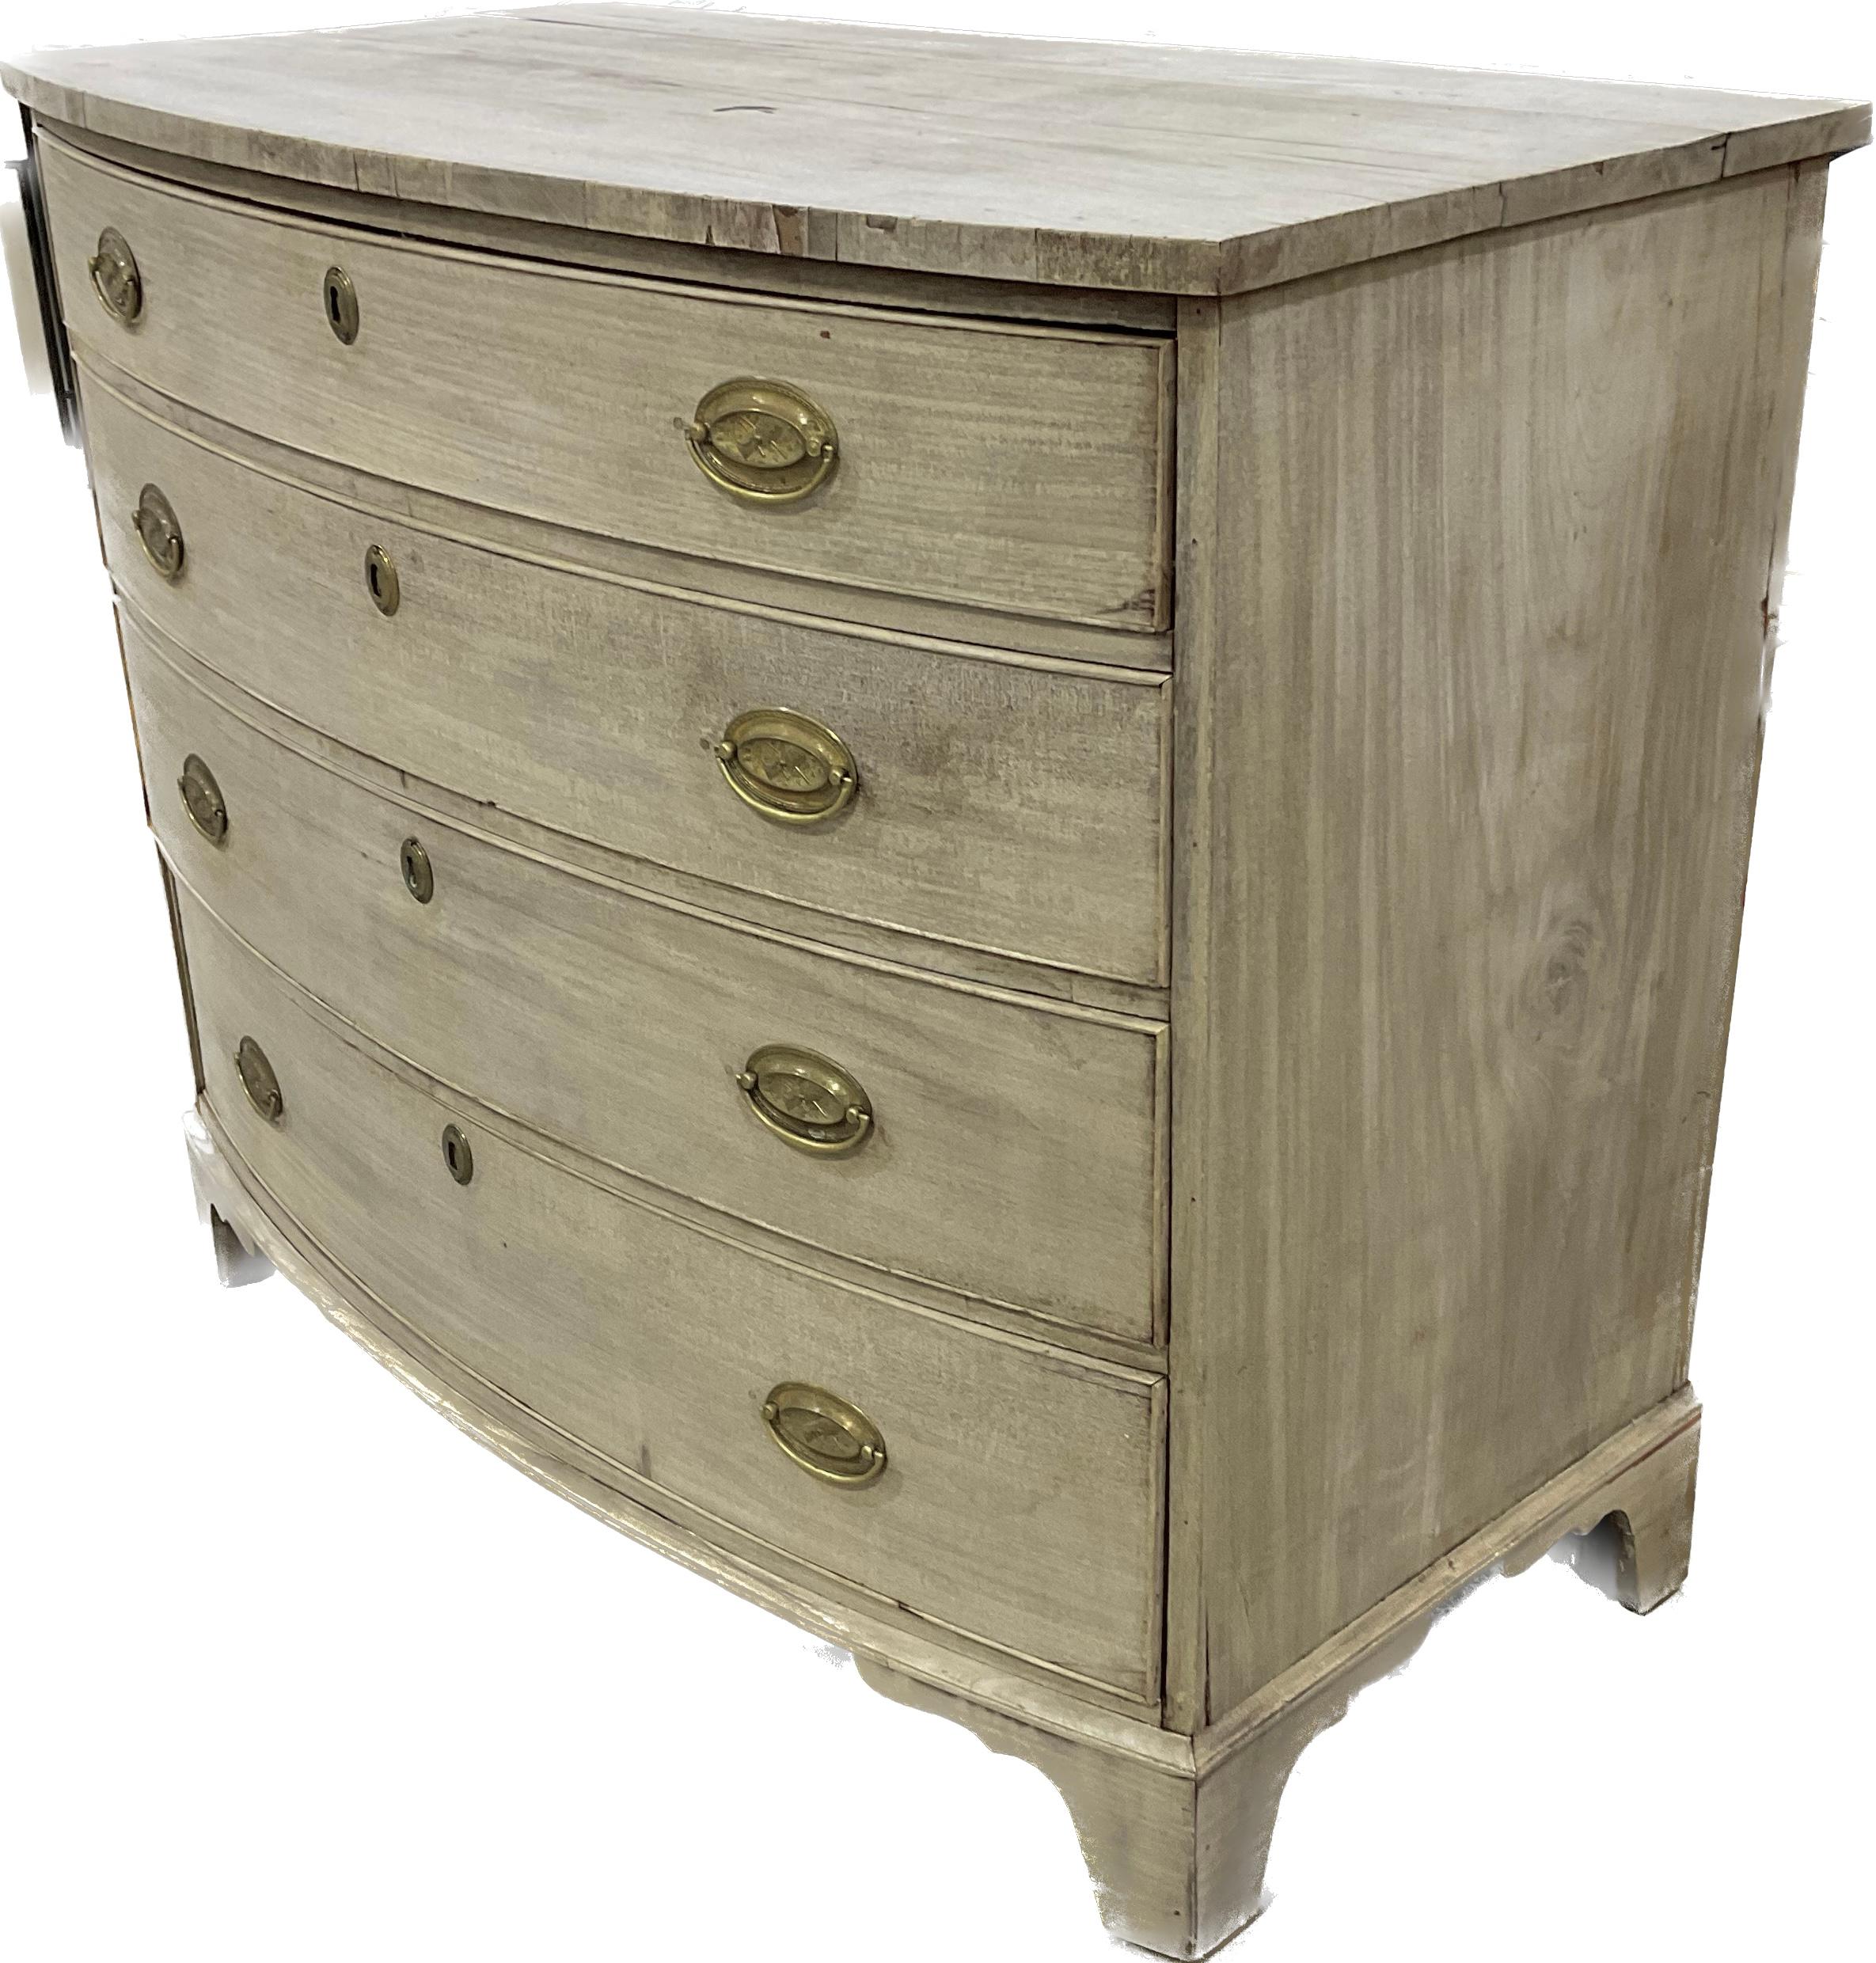 George III 19th Century English Bleached Mahogany Bowfront Chest of Drawers